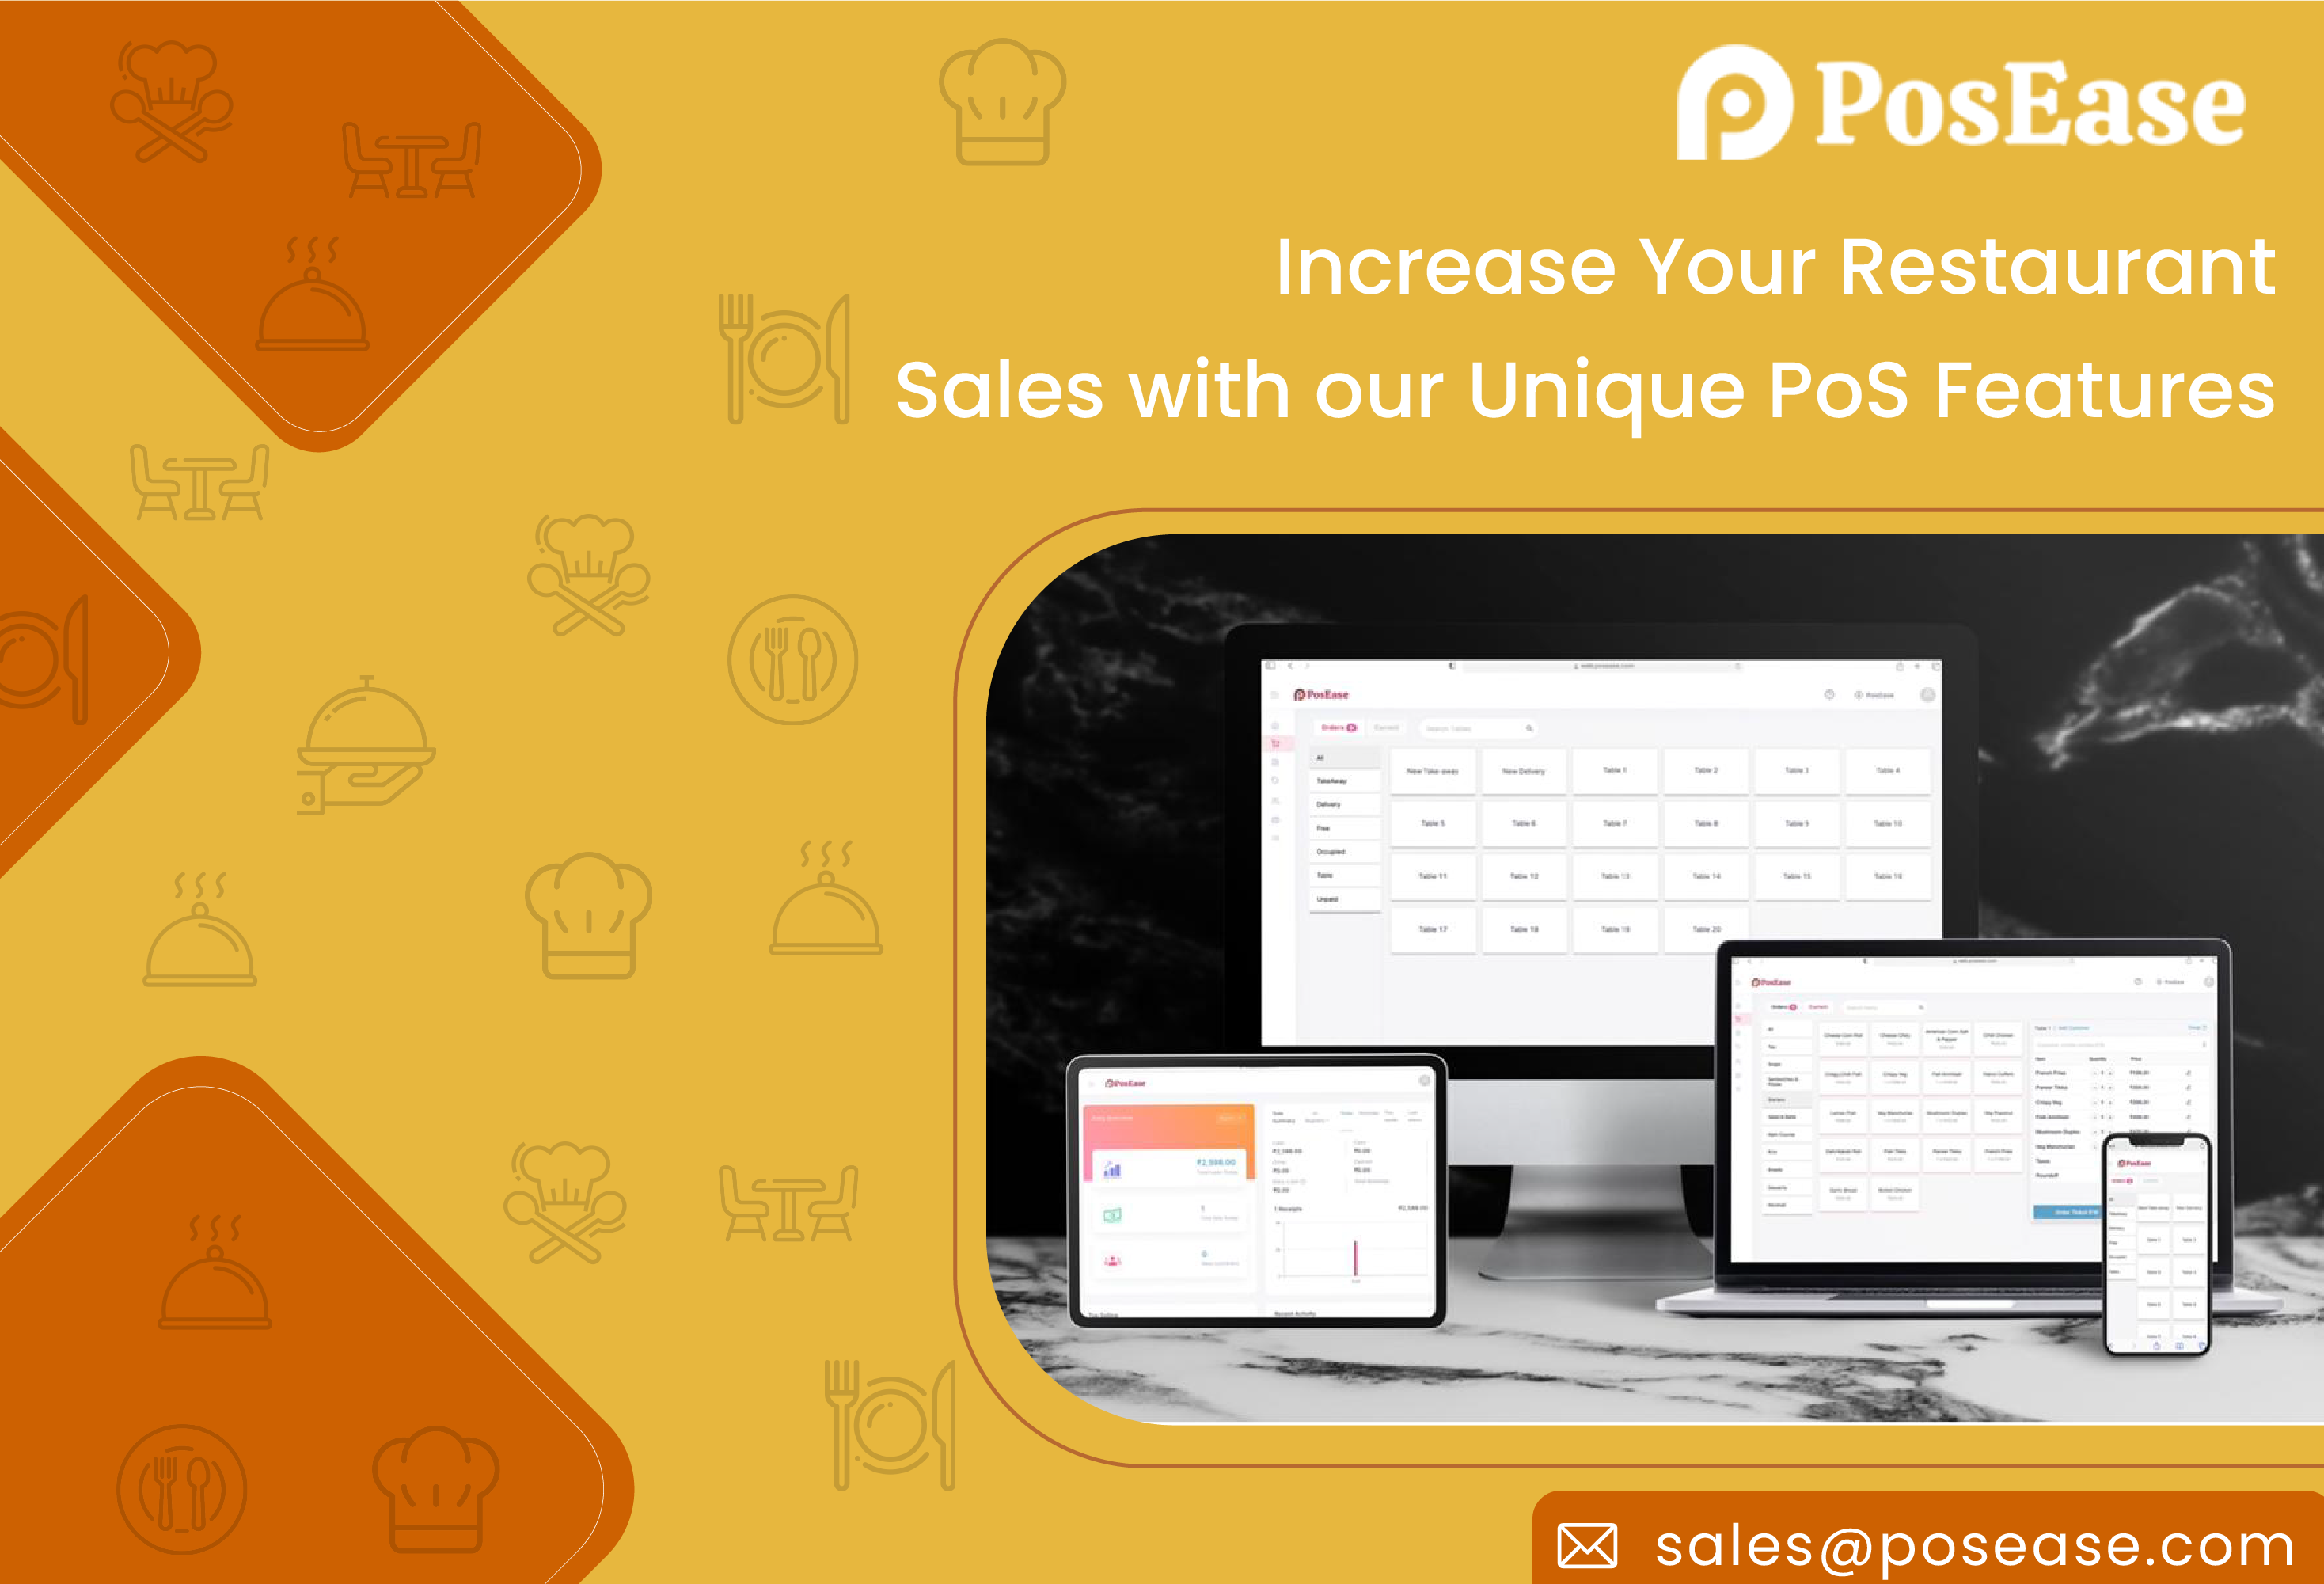 Increase your restaurant sales with our unique POS features